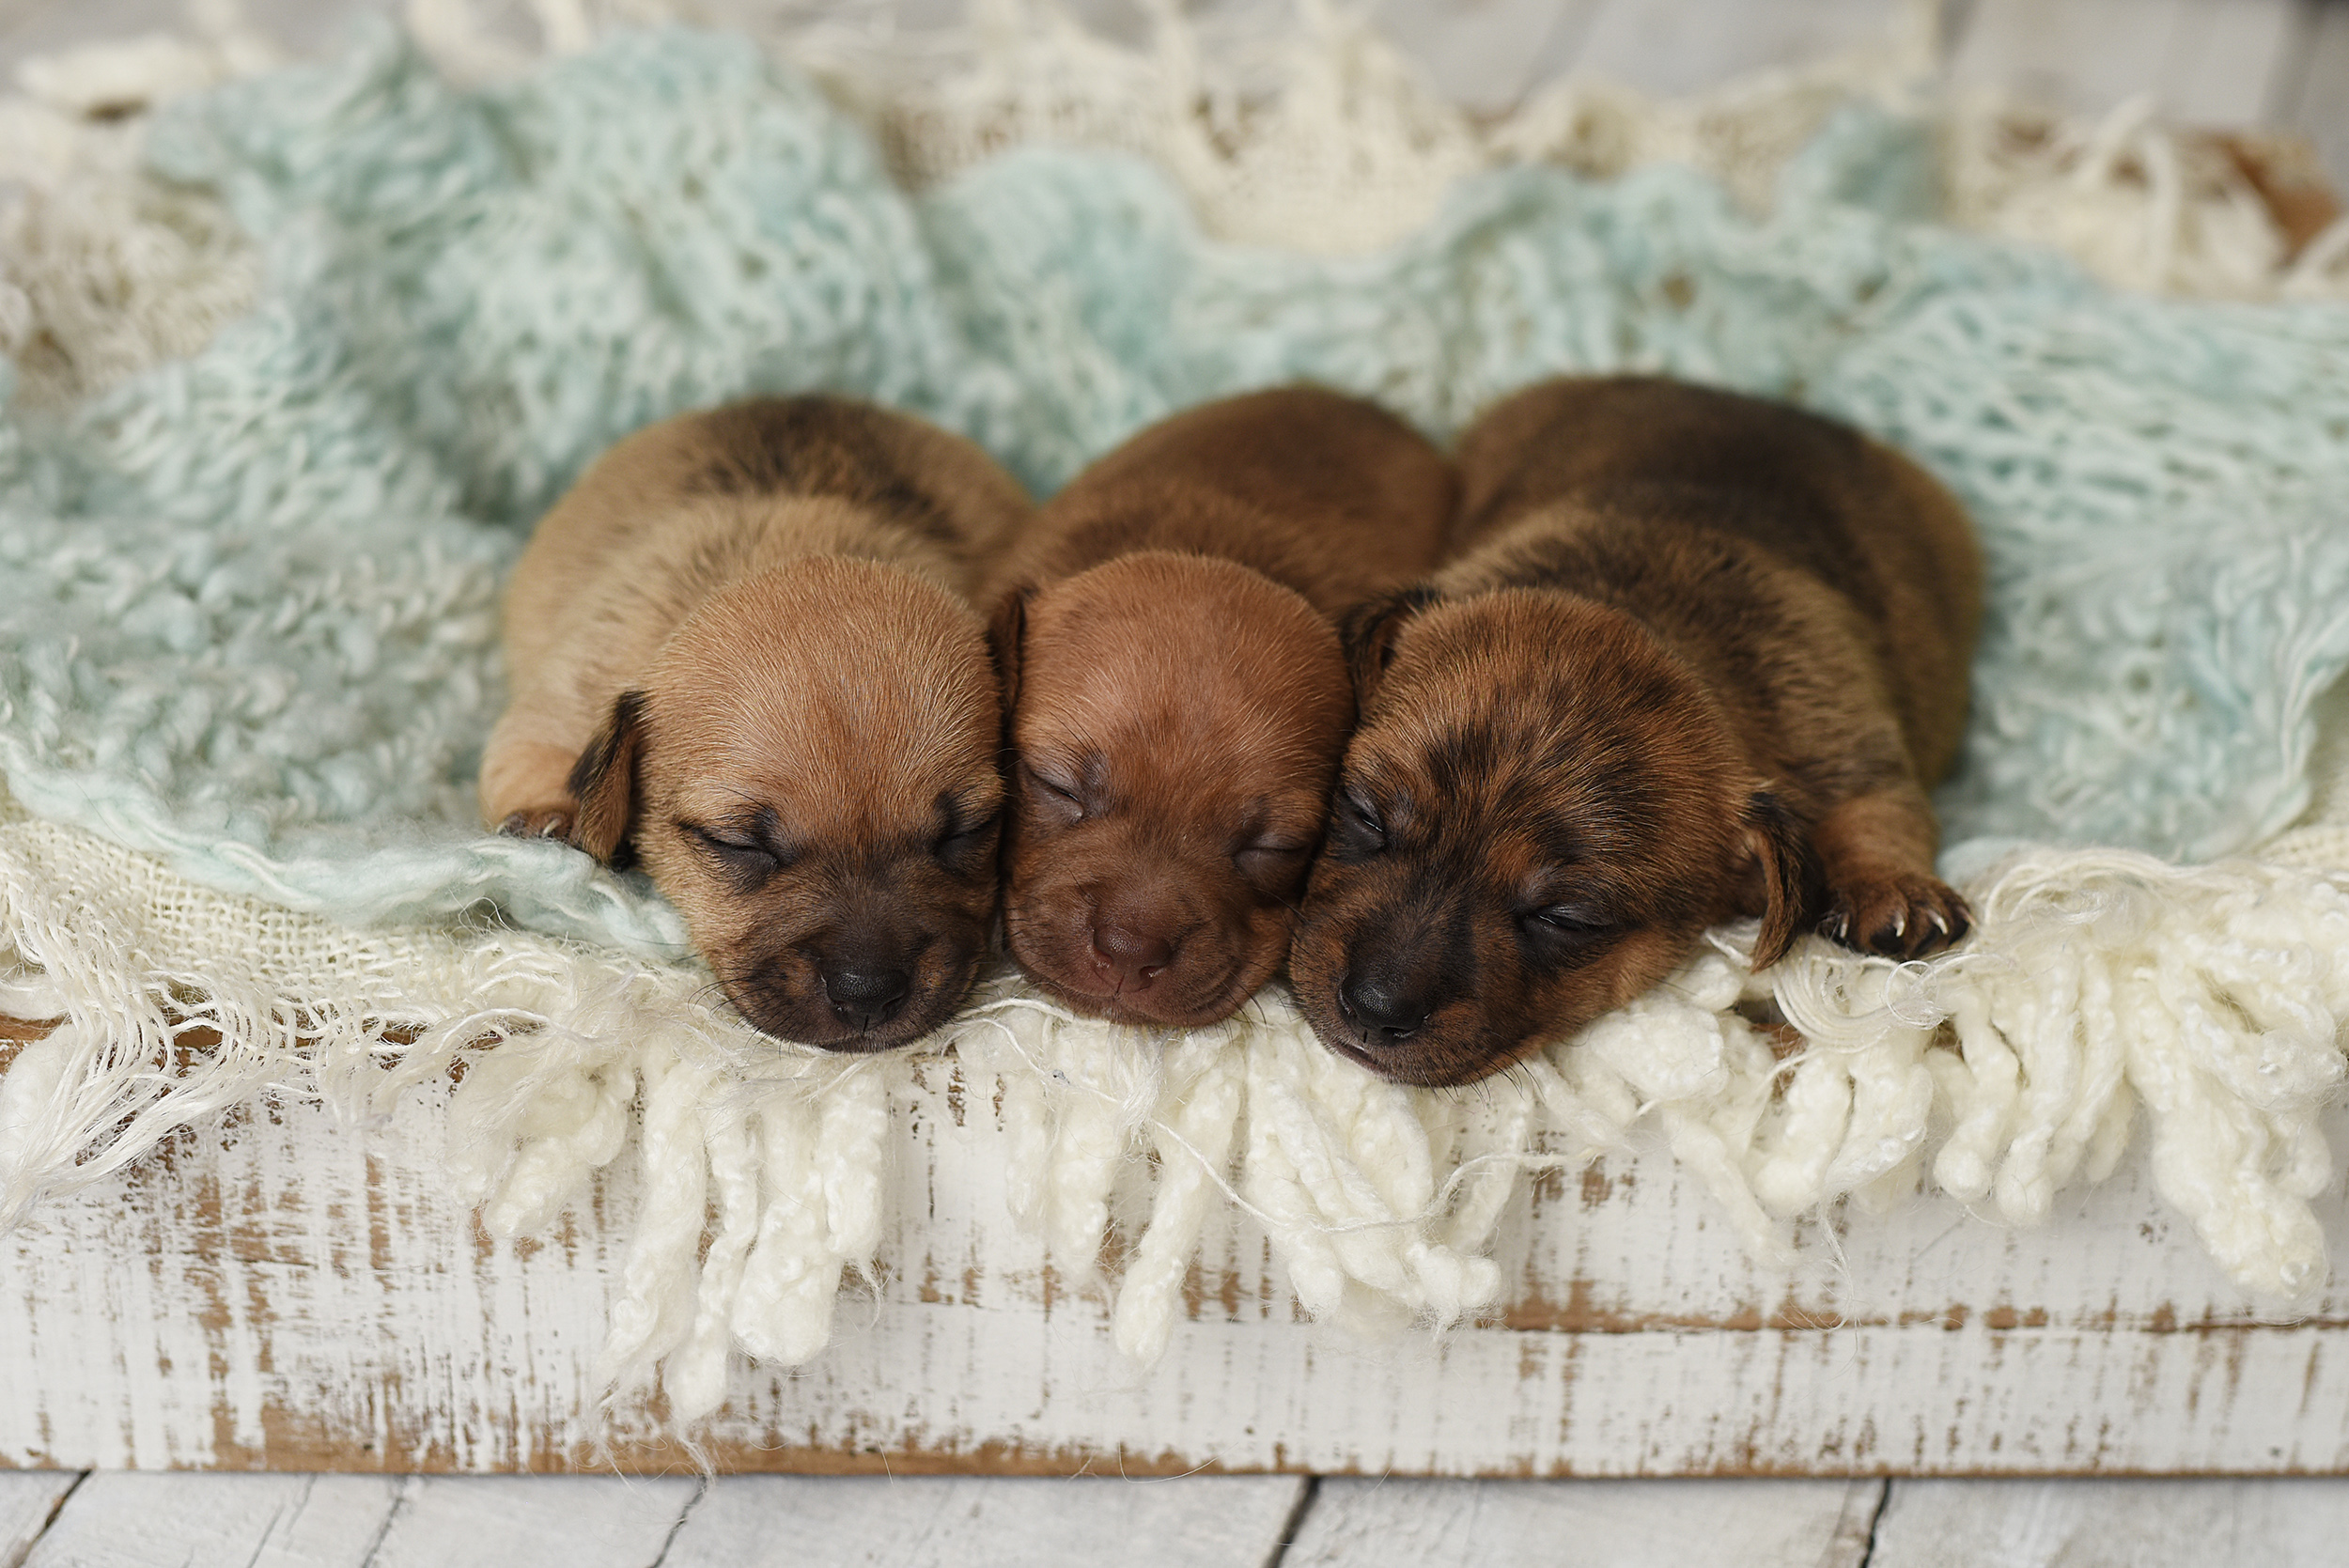 PHOTO: Photographer Kelly Frankenburg said she posed a Chihuahua mom and puppies like human newborns to create photos that could help them get adopted.